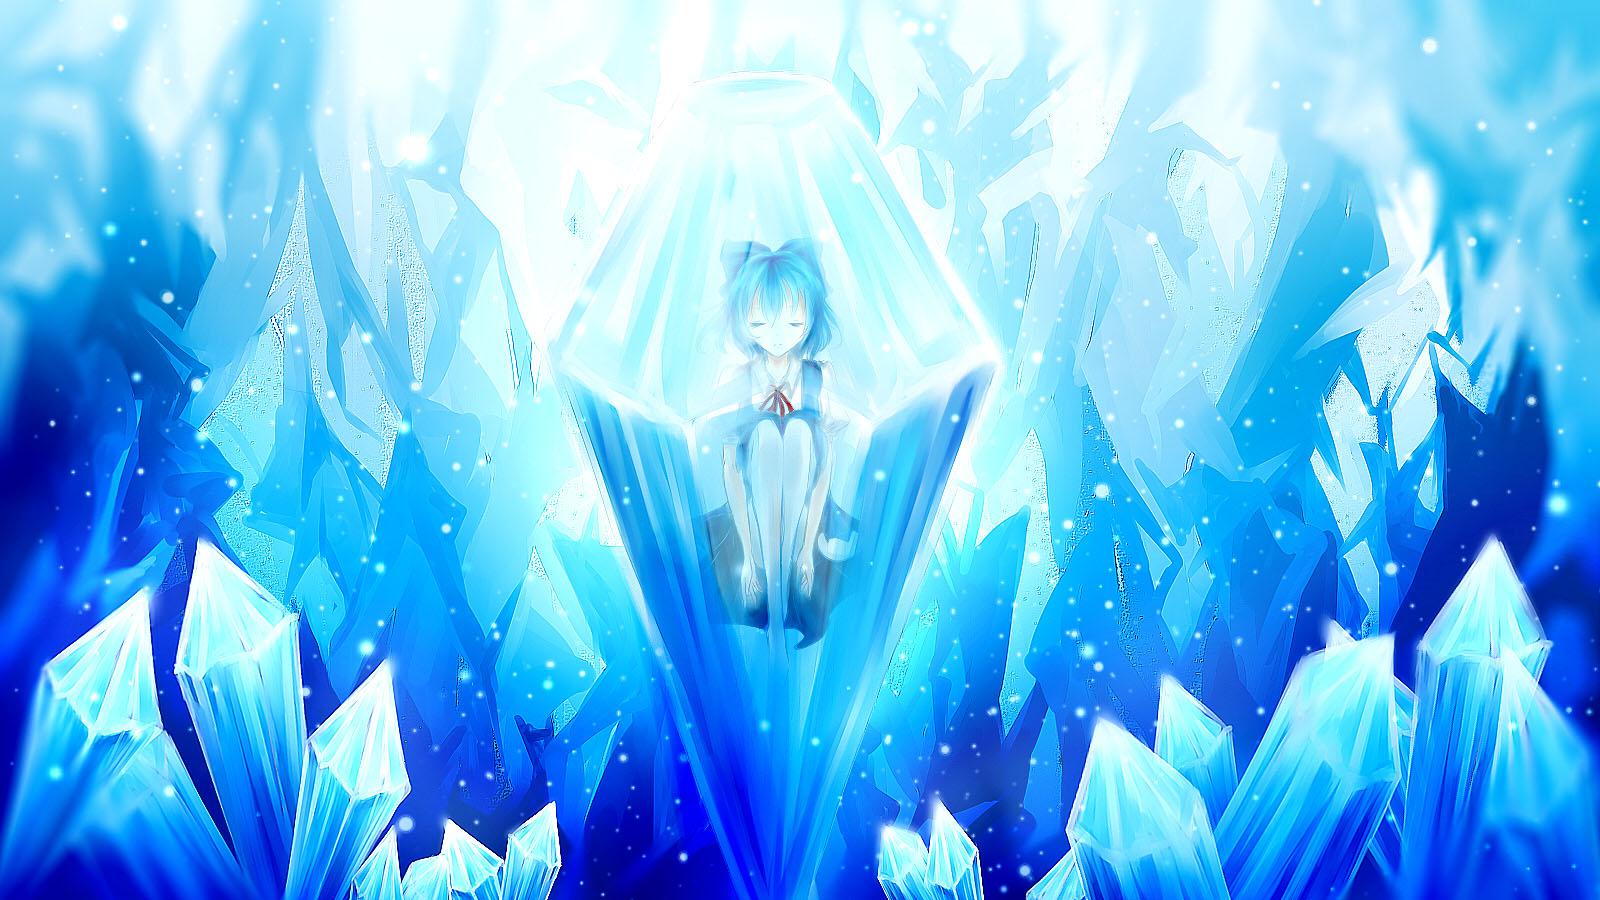 Cirno - (#155448) - High Quality and Resolution Wallpapers on ...